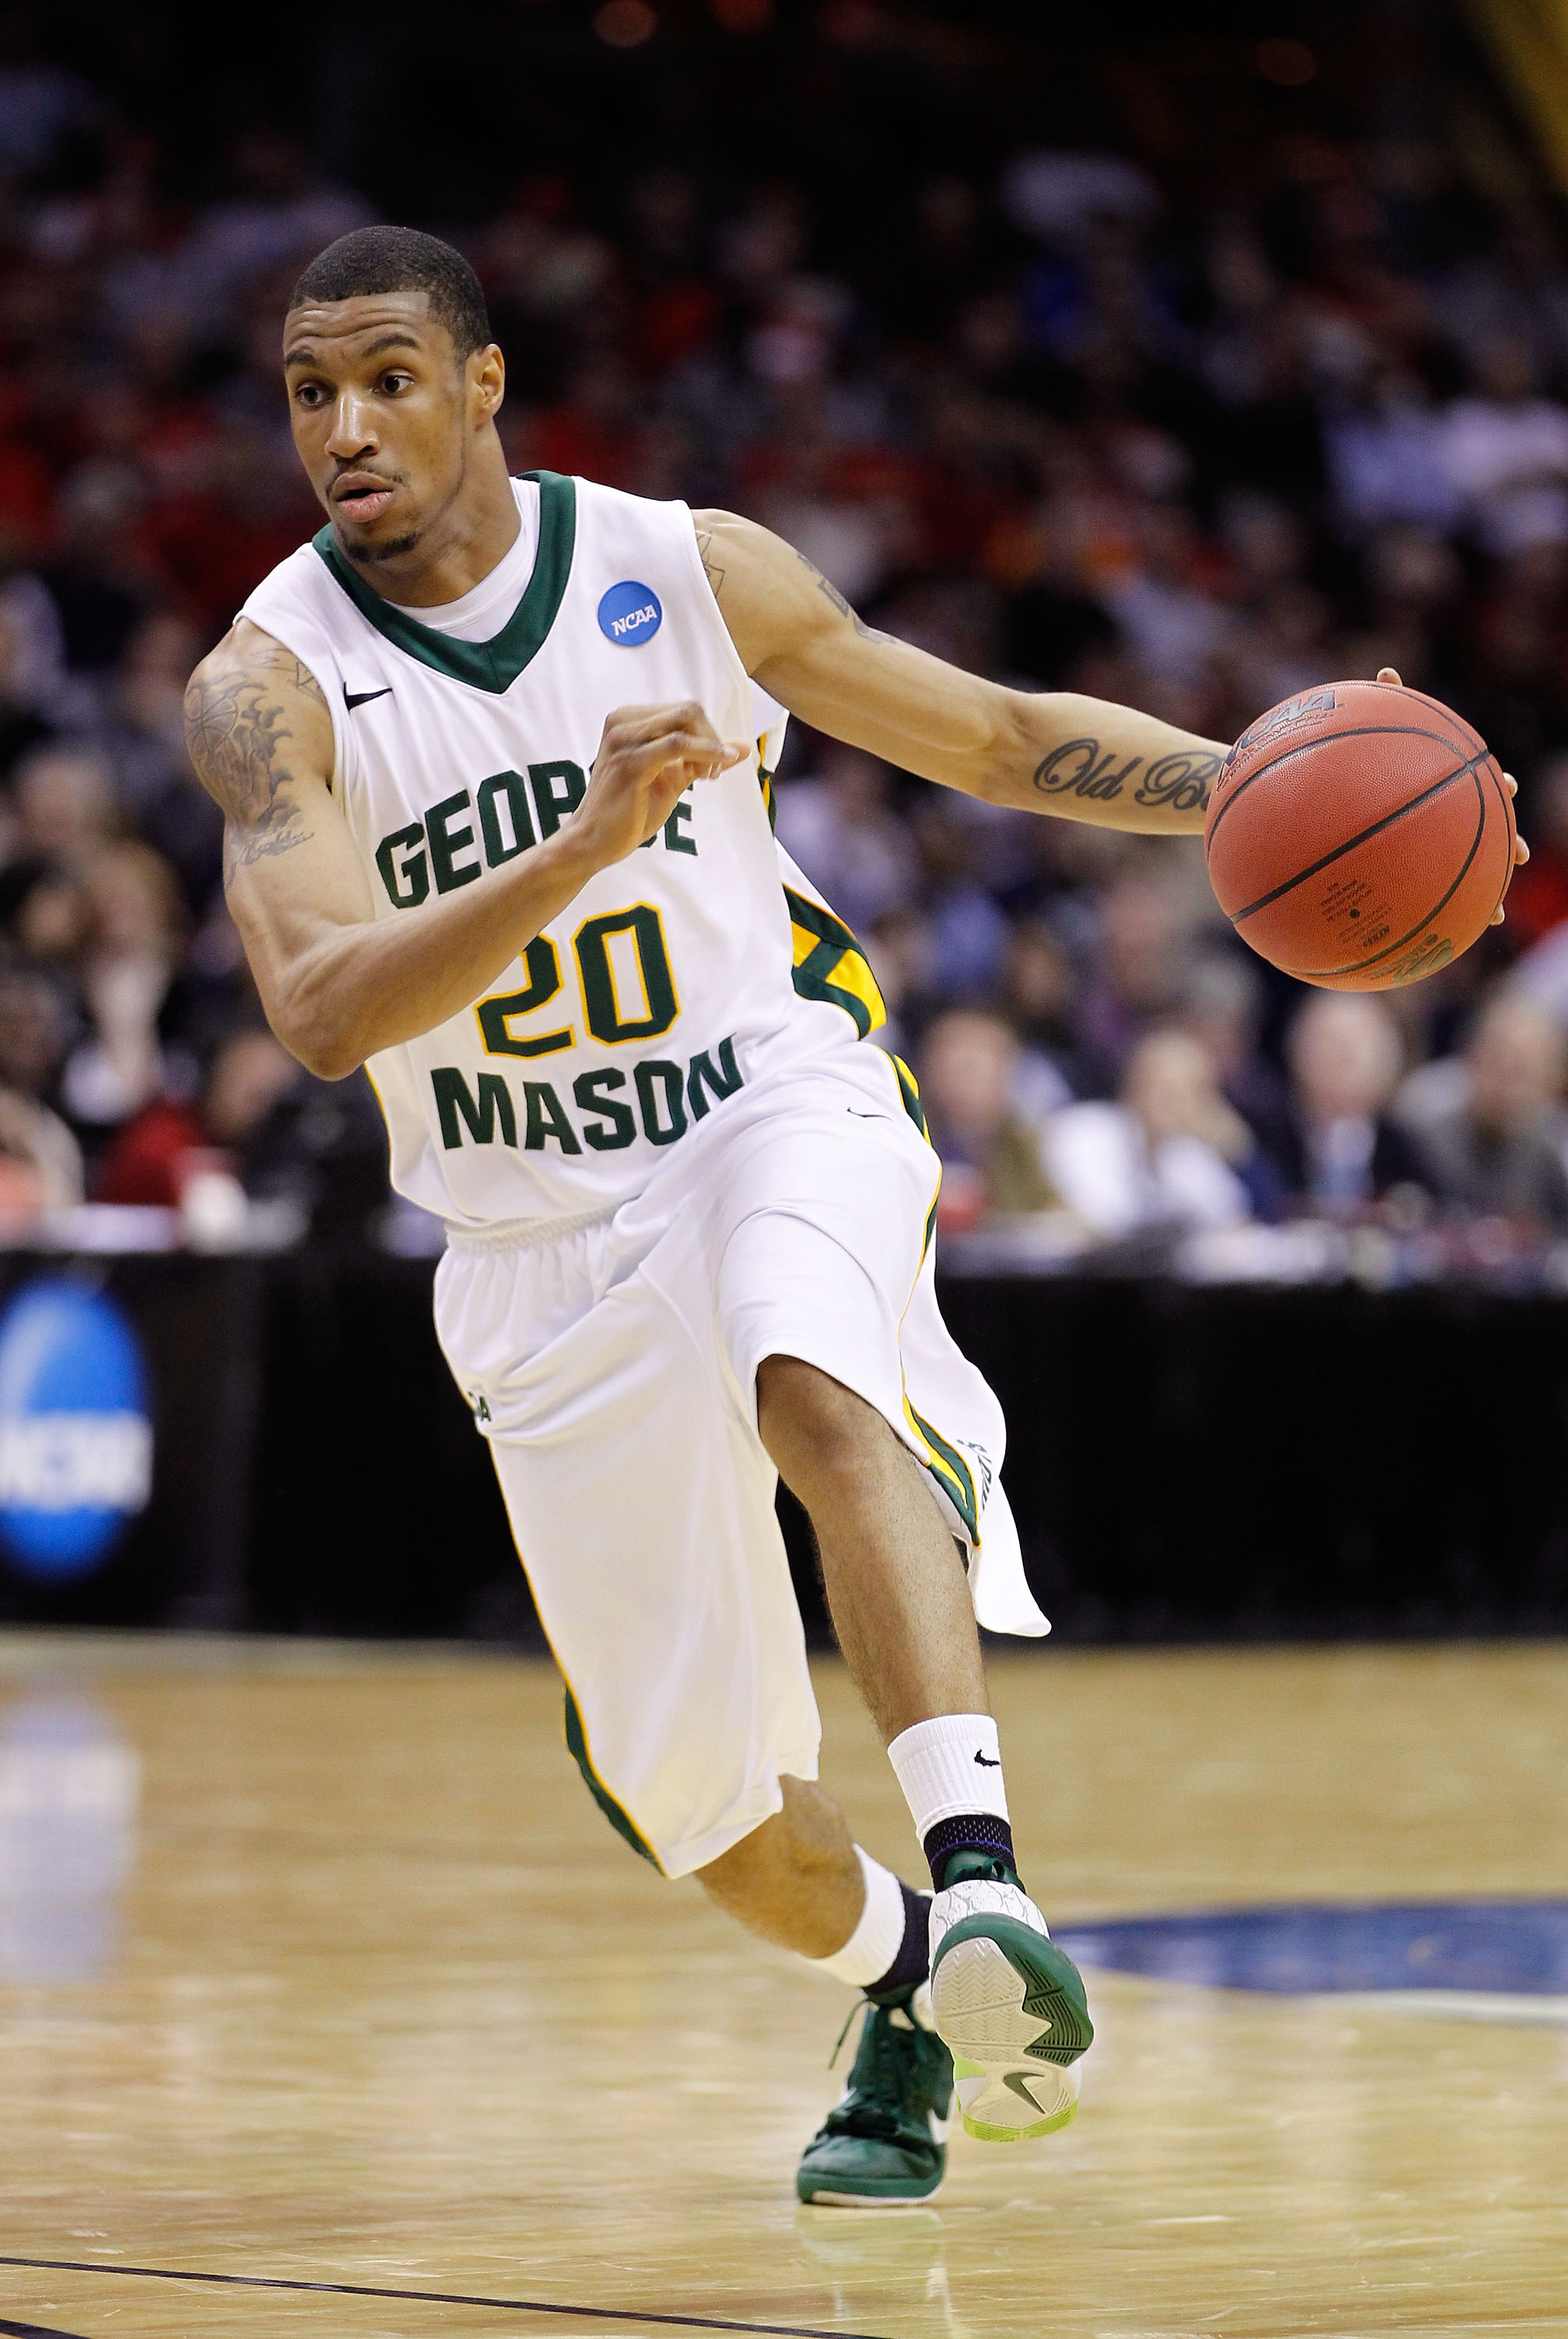 CLEVELAND, OH - MARCH 18: Cam Long #20 of the George Mason Patriots handles the ball against the Xavier Musketeers during the second round of the 2011 NCAA men's basketball tournament at Quicken Loans Arena on March 18, 2011 in Cleveland, Ohio.  (Photo by